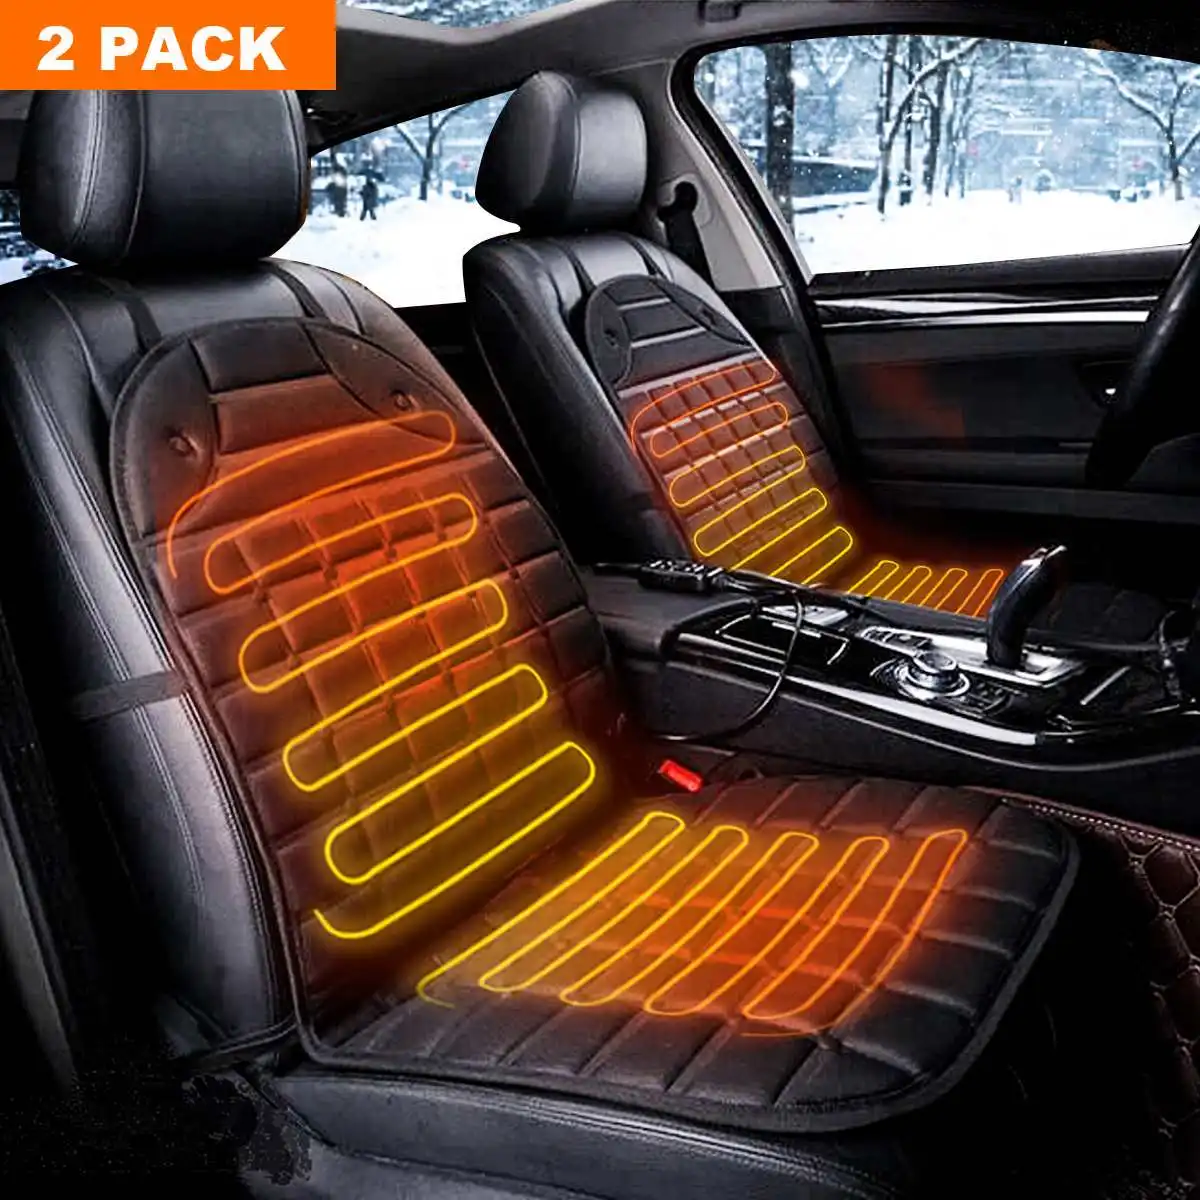 KLJYNL Car Heated Seat Cushion Heated Seat Covers for Cars with Intelligent Temperature Controller 12V Universal Car Heated Pad Fast Heating Massager for Cold Weather & Home Office Chair Black 